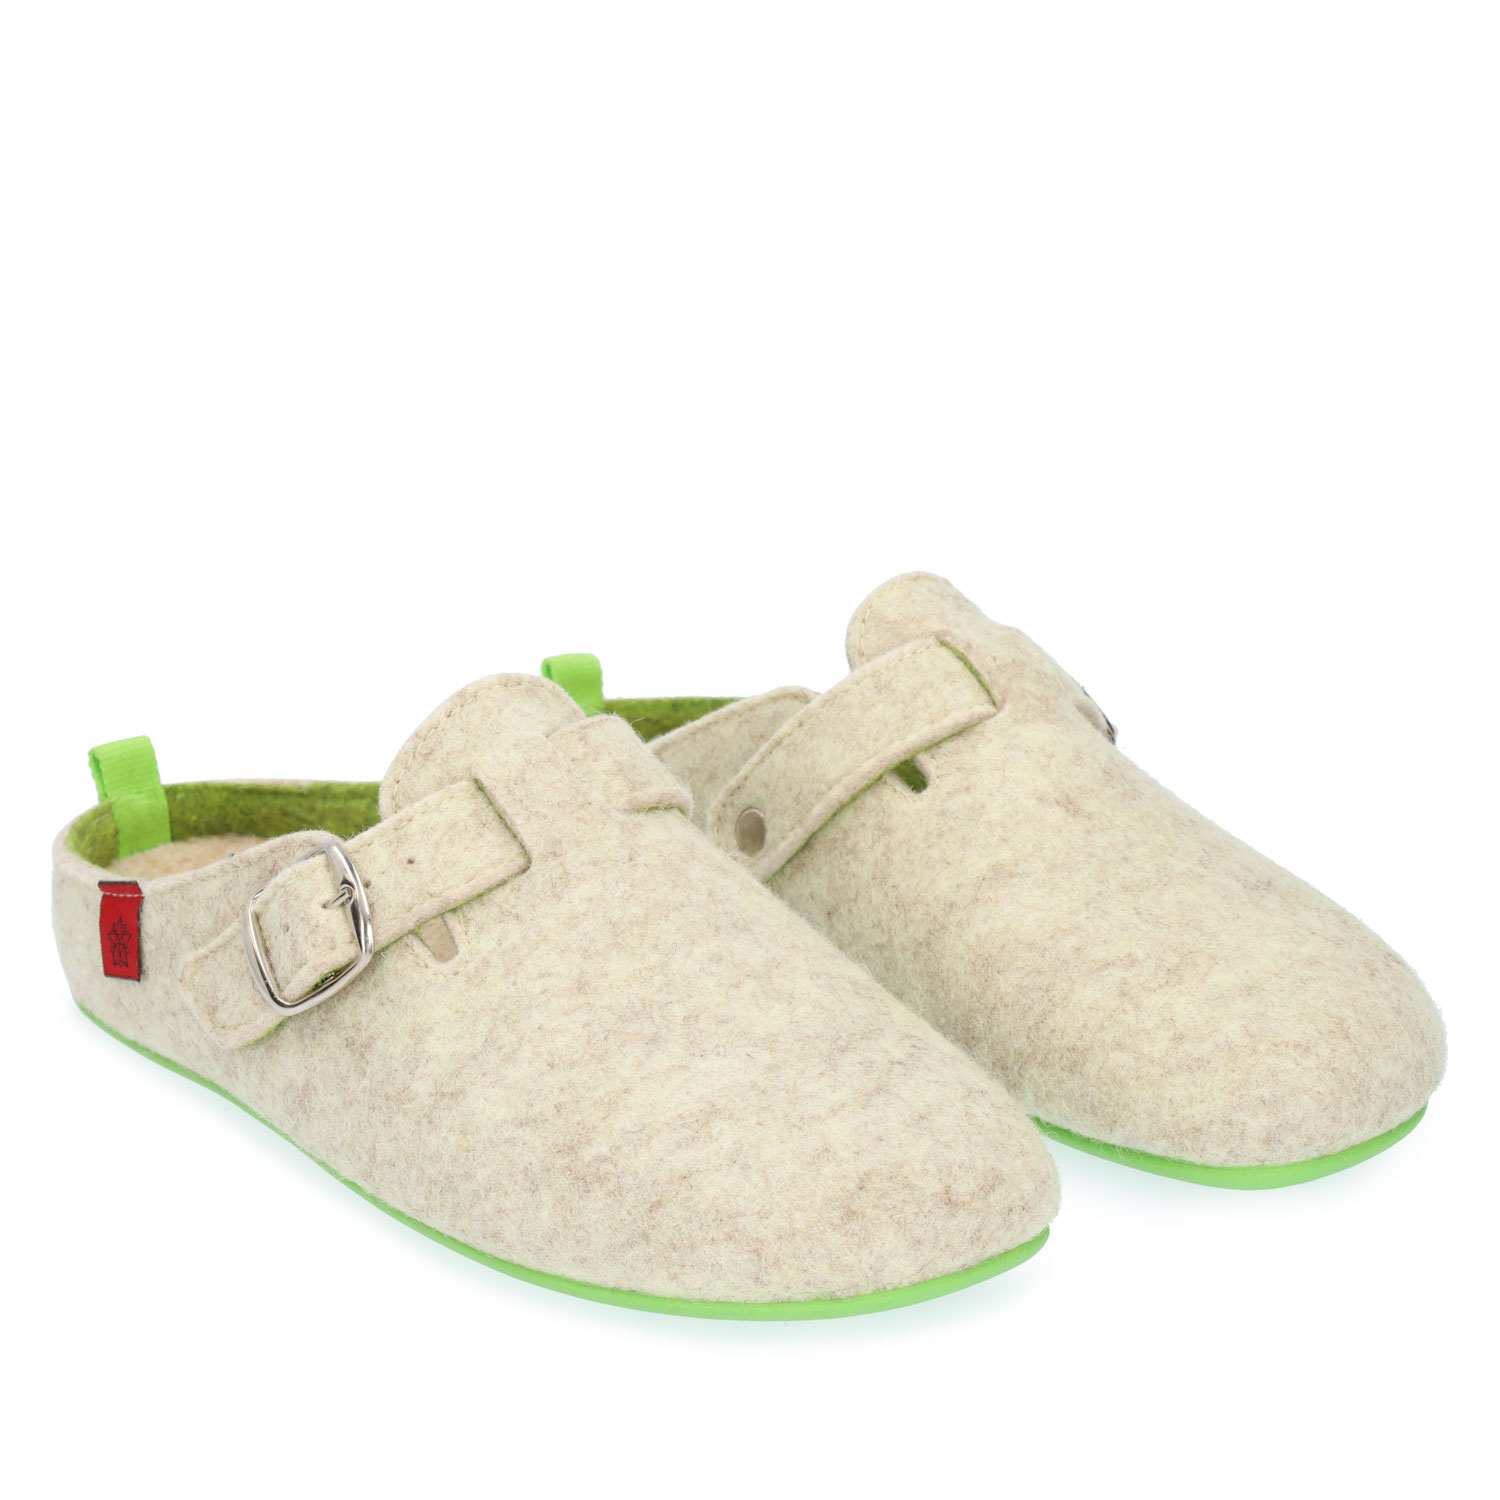 Unisex home slippers in white felt and buckle detail 